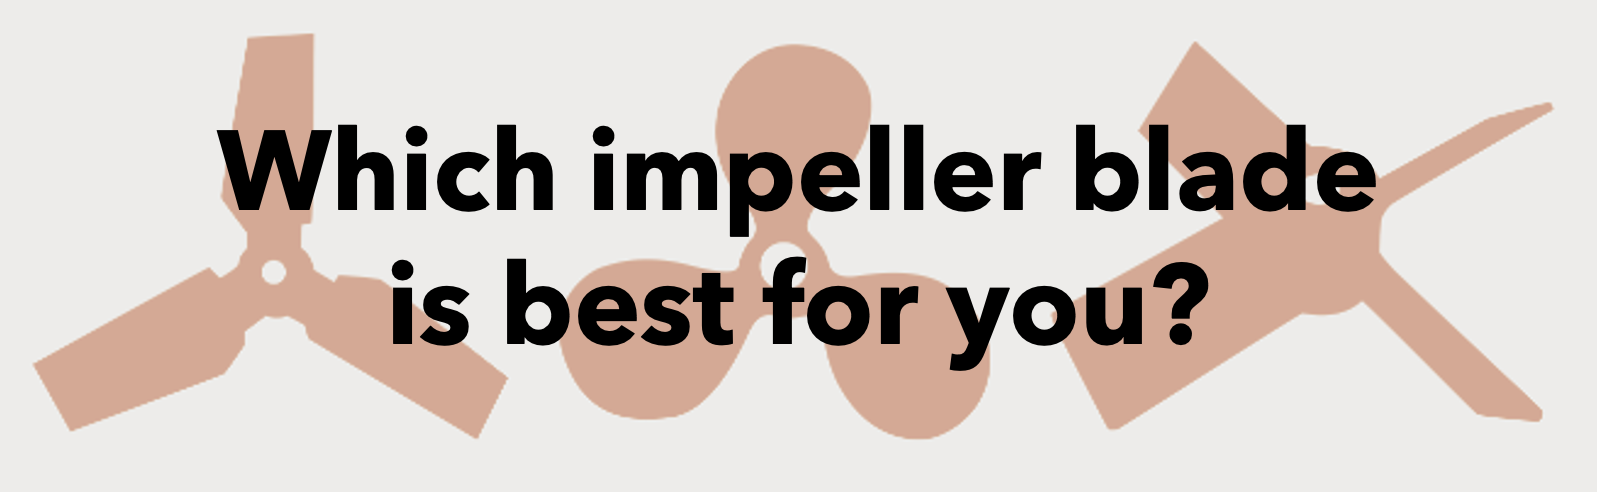 which impeller blade is best for you?